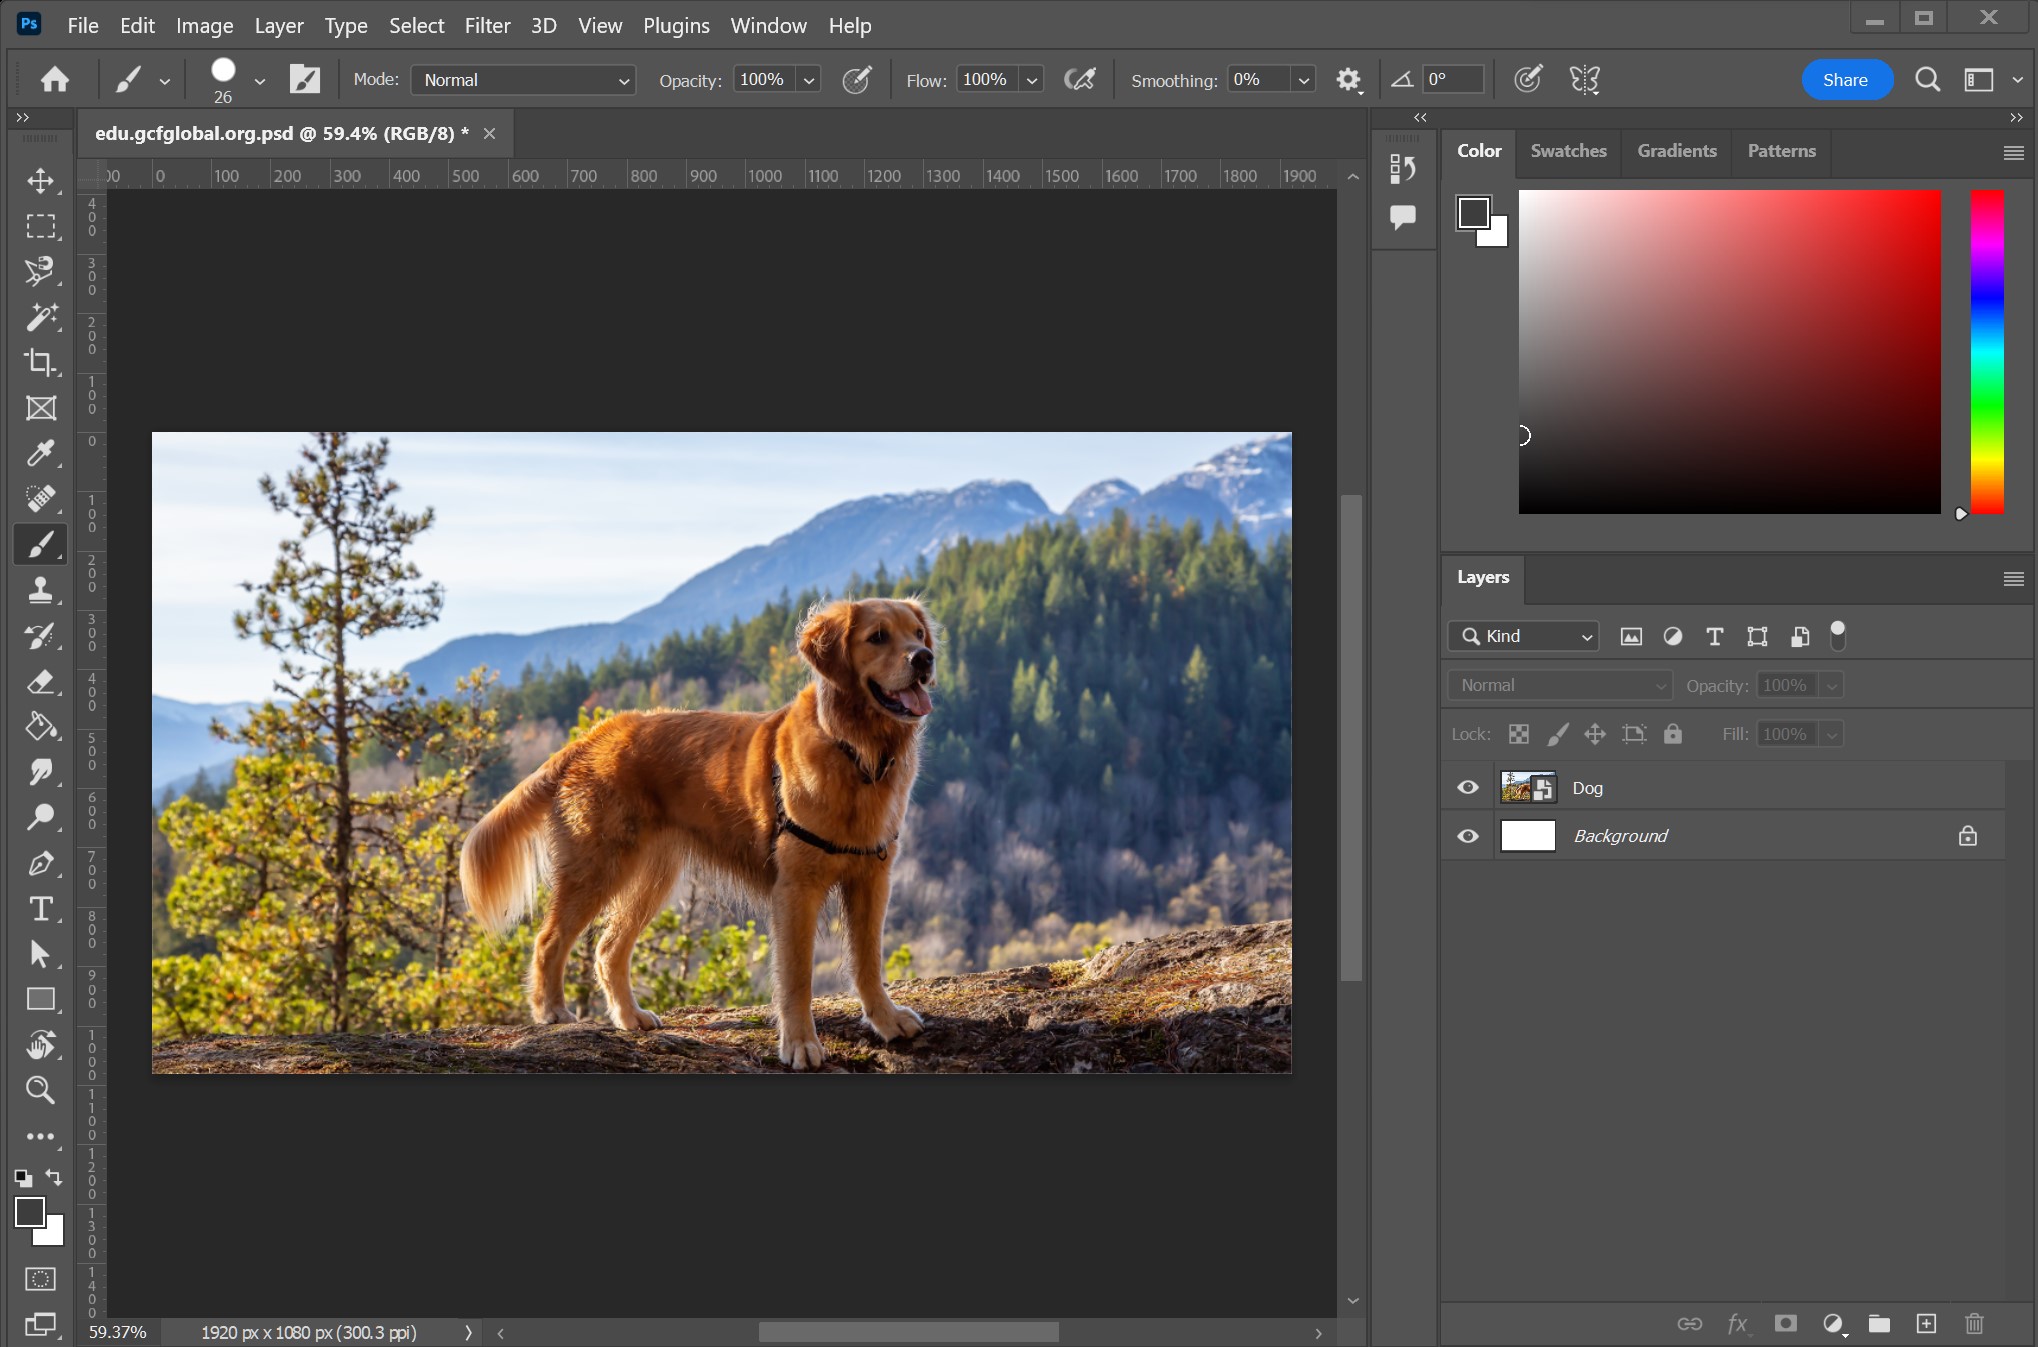 How to make a picture look professional in Photoshop